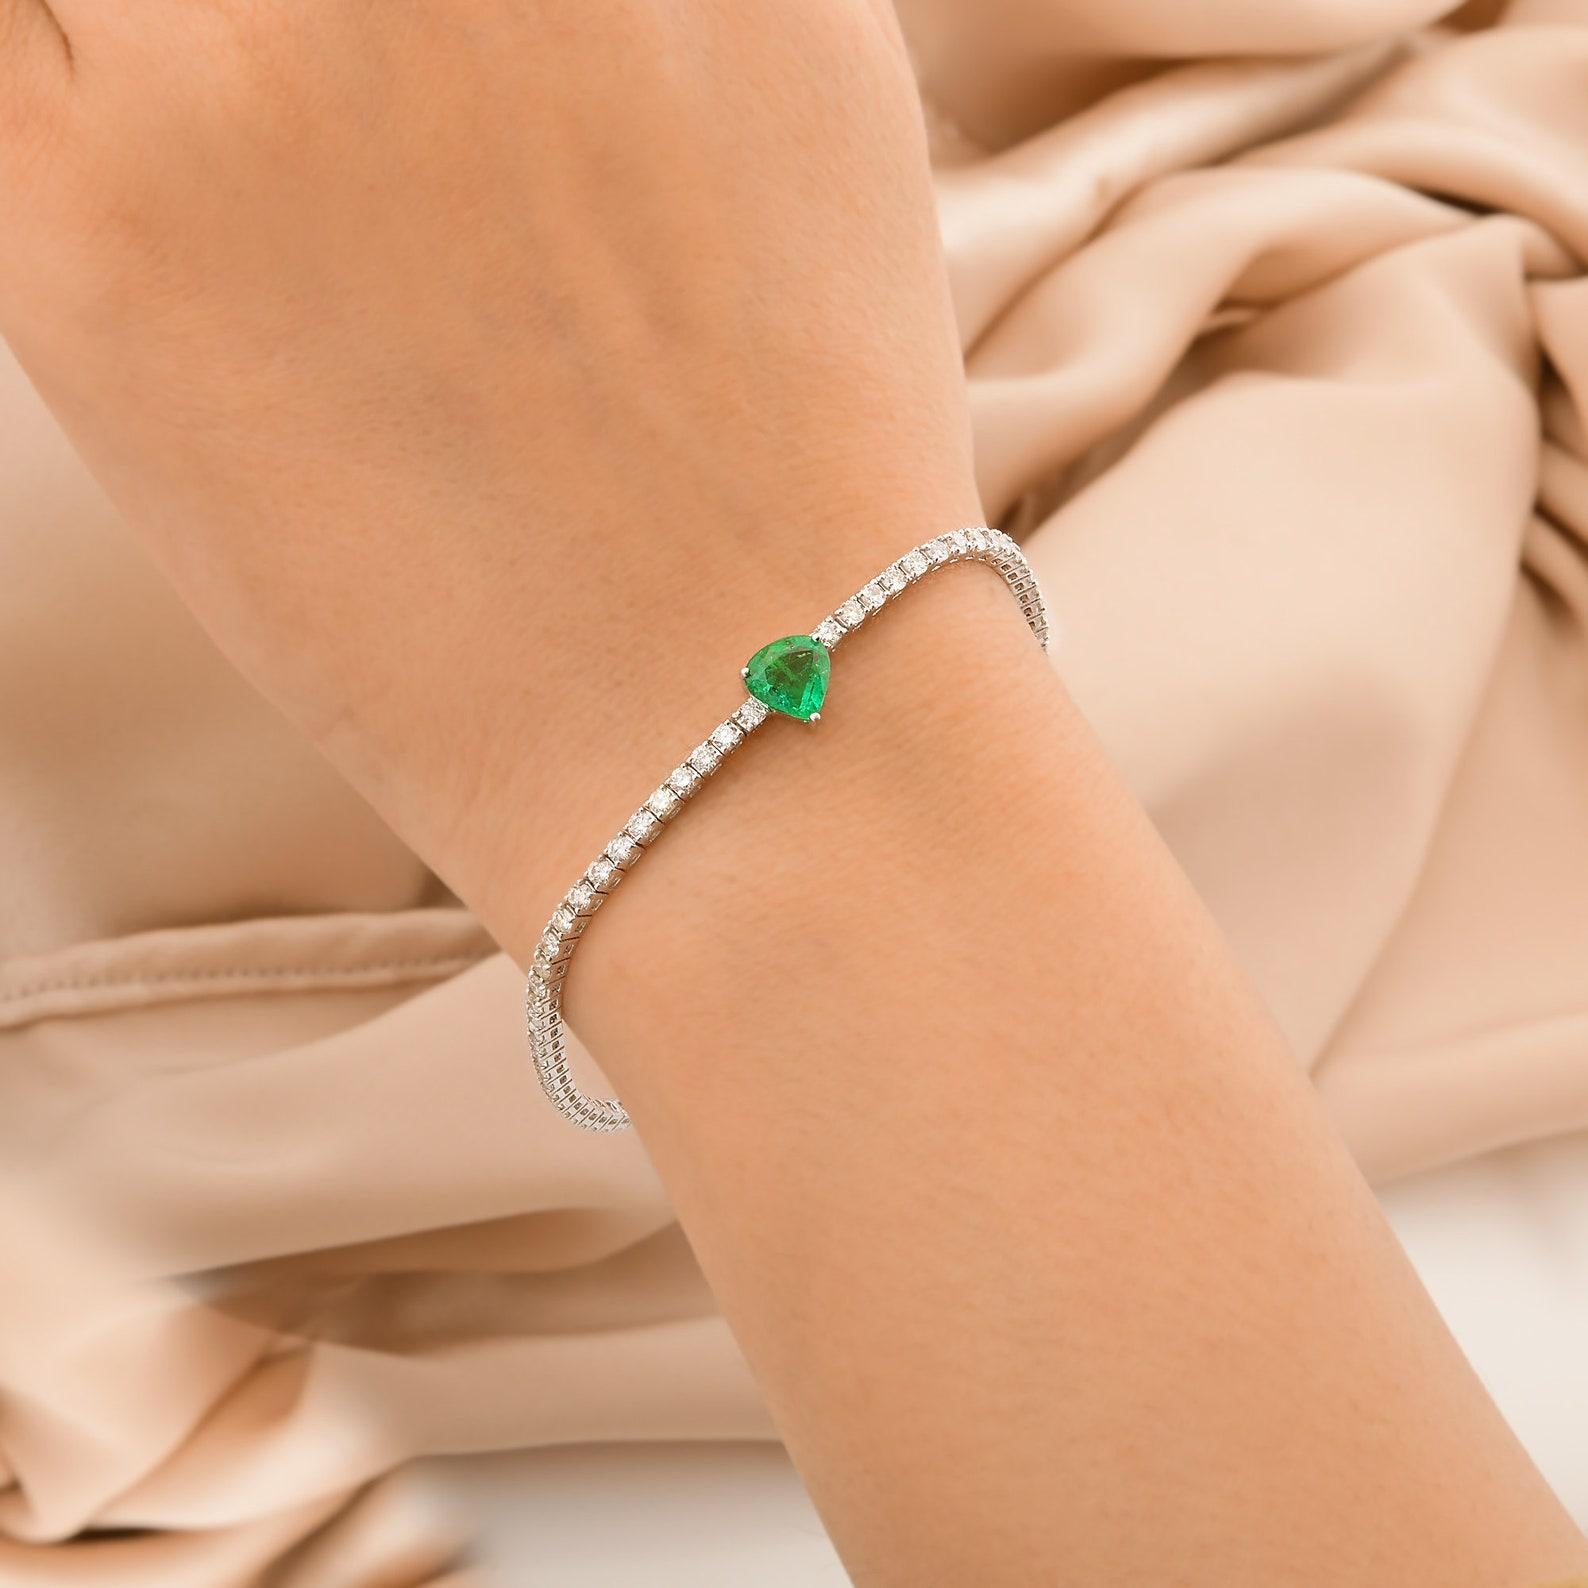 A beautiful bracelet handmade in 14K white gold. It is set in 1.23 carats of trillion shape emerald and 2.70 carats of sparkling diamonds. Wear it alone or stack it with your favorite pieces.

FOLLOW MEGHNA JEWELS storefront to view the latest